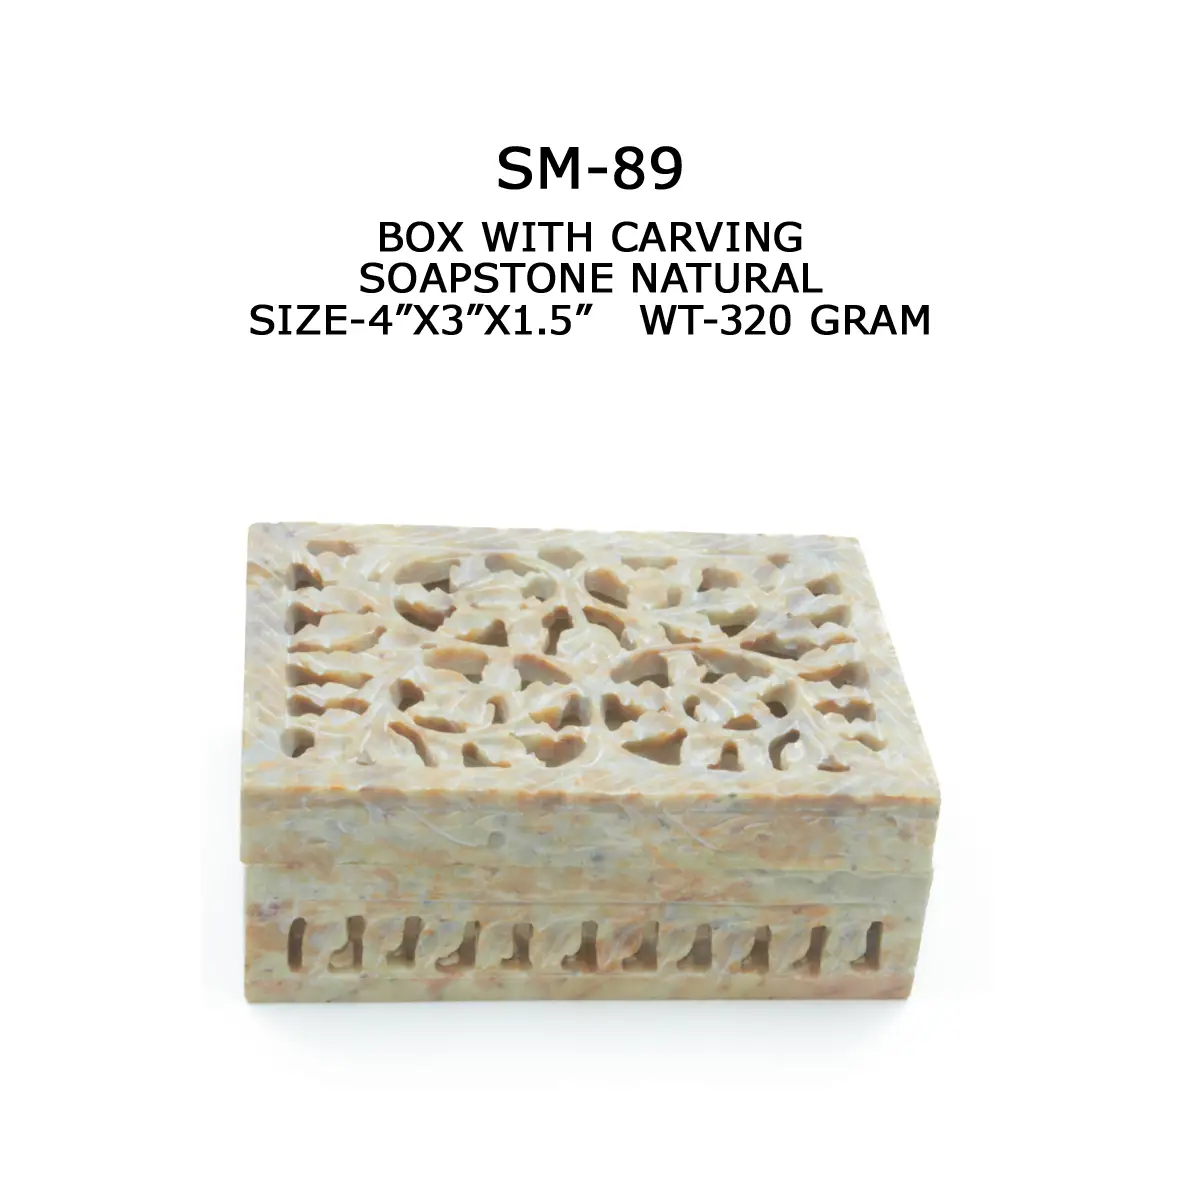 BOx WITH CARVING SOAPSTONE NATURAL